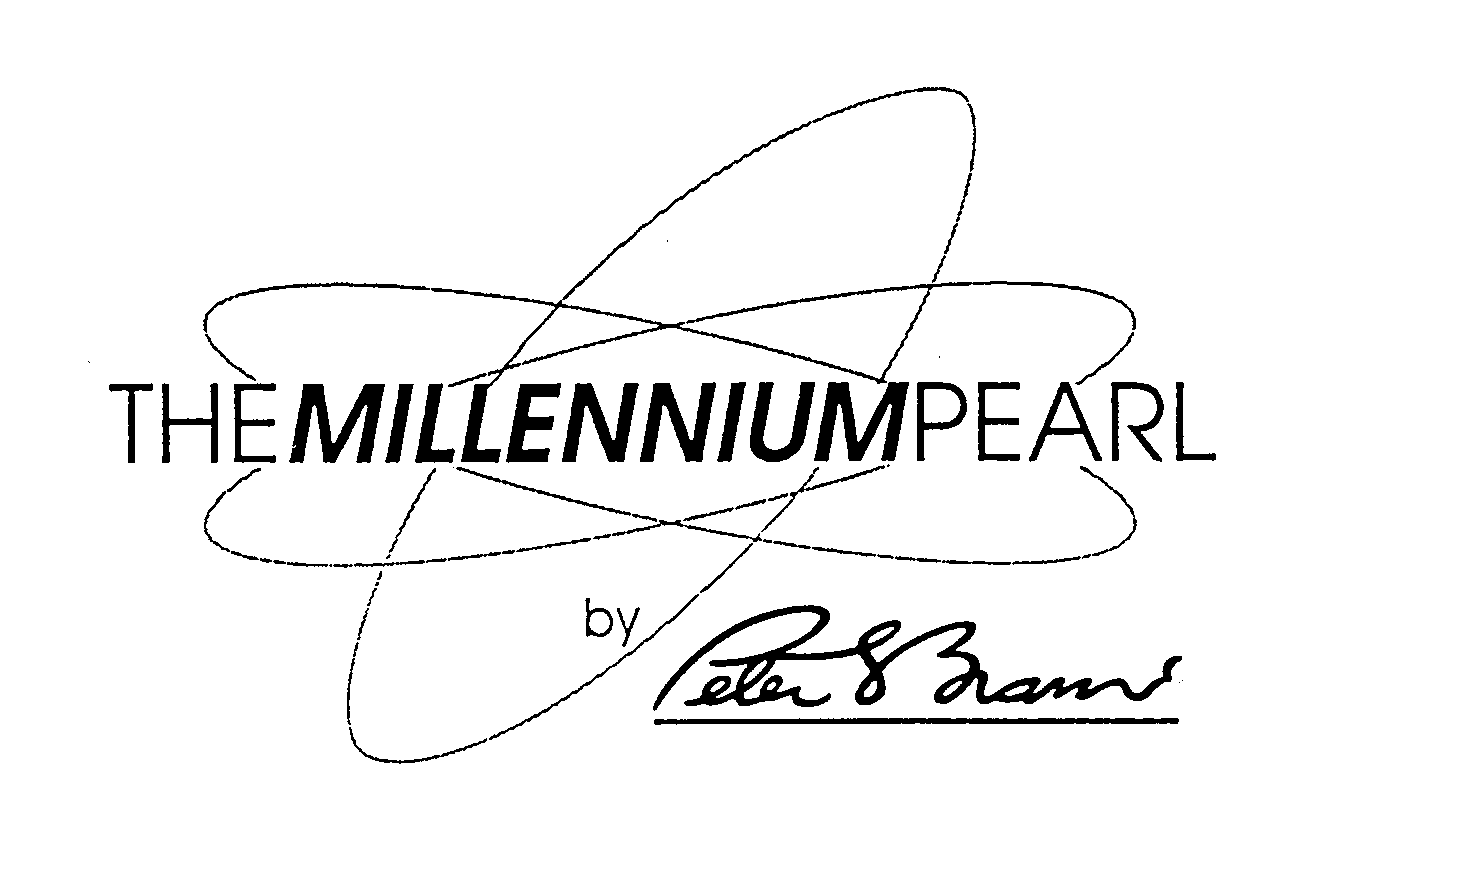 Trademark Logo THE MILLENNIUM PEARL BY PETER S. BRAMS